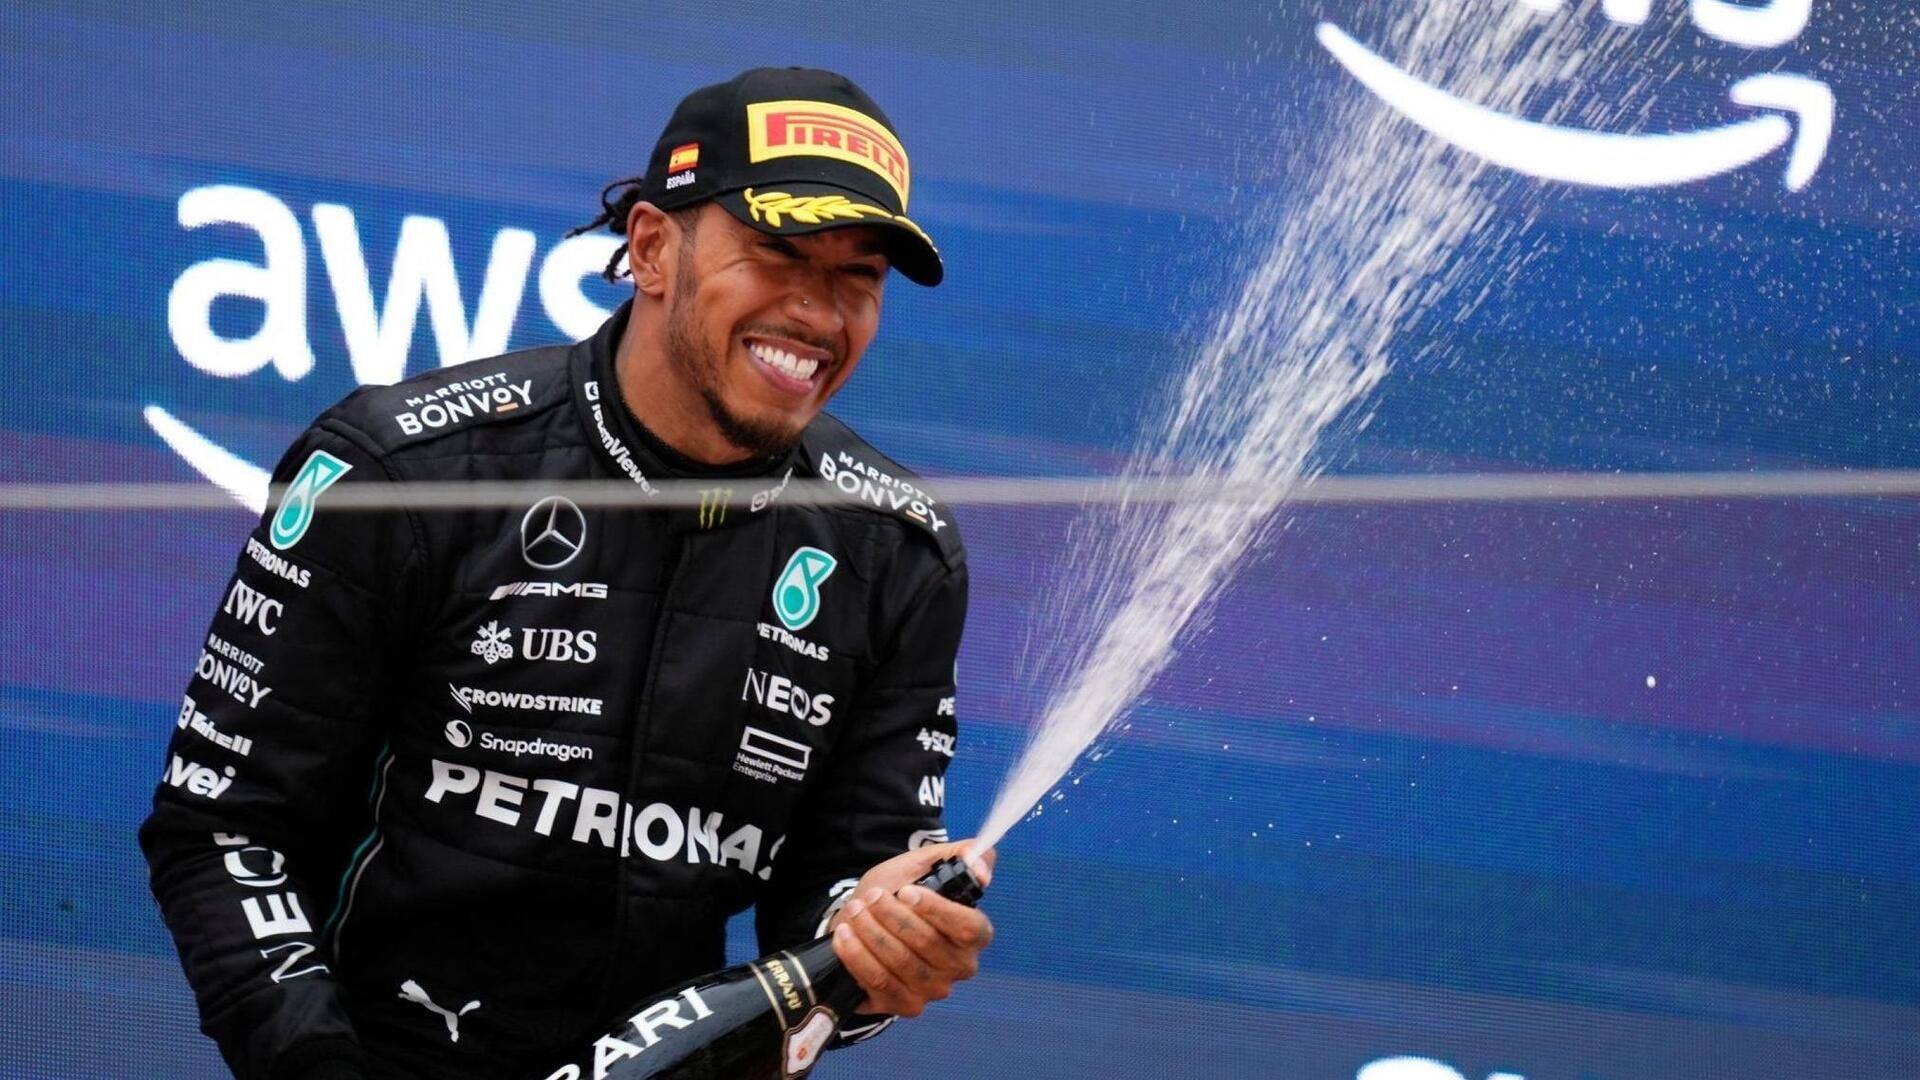 US GP: Why was Lewis Hamilton disqualified from second place?